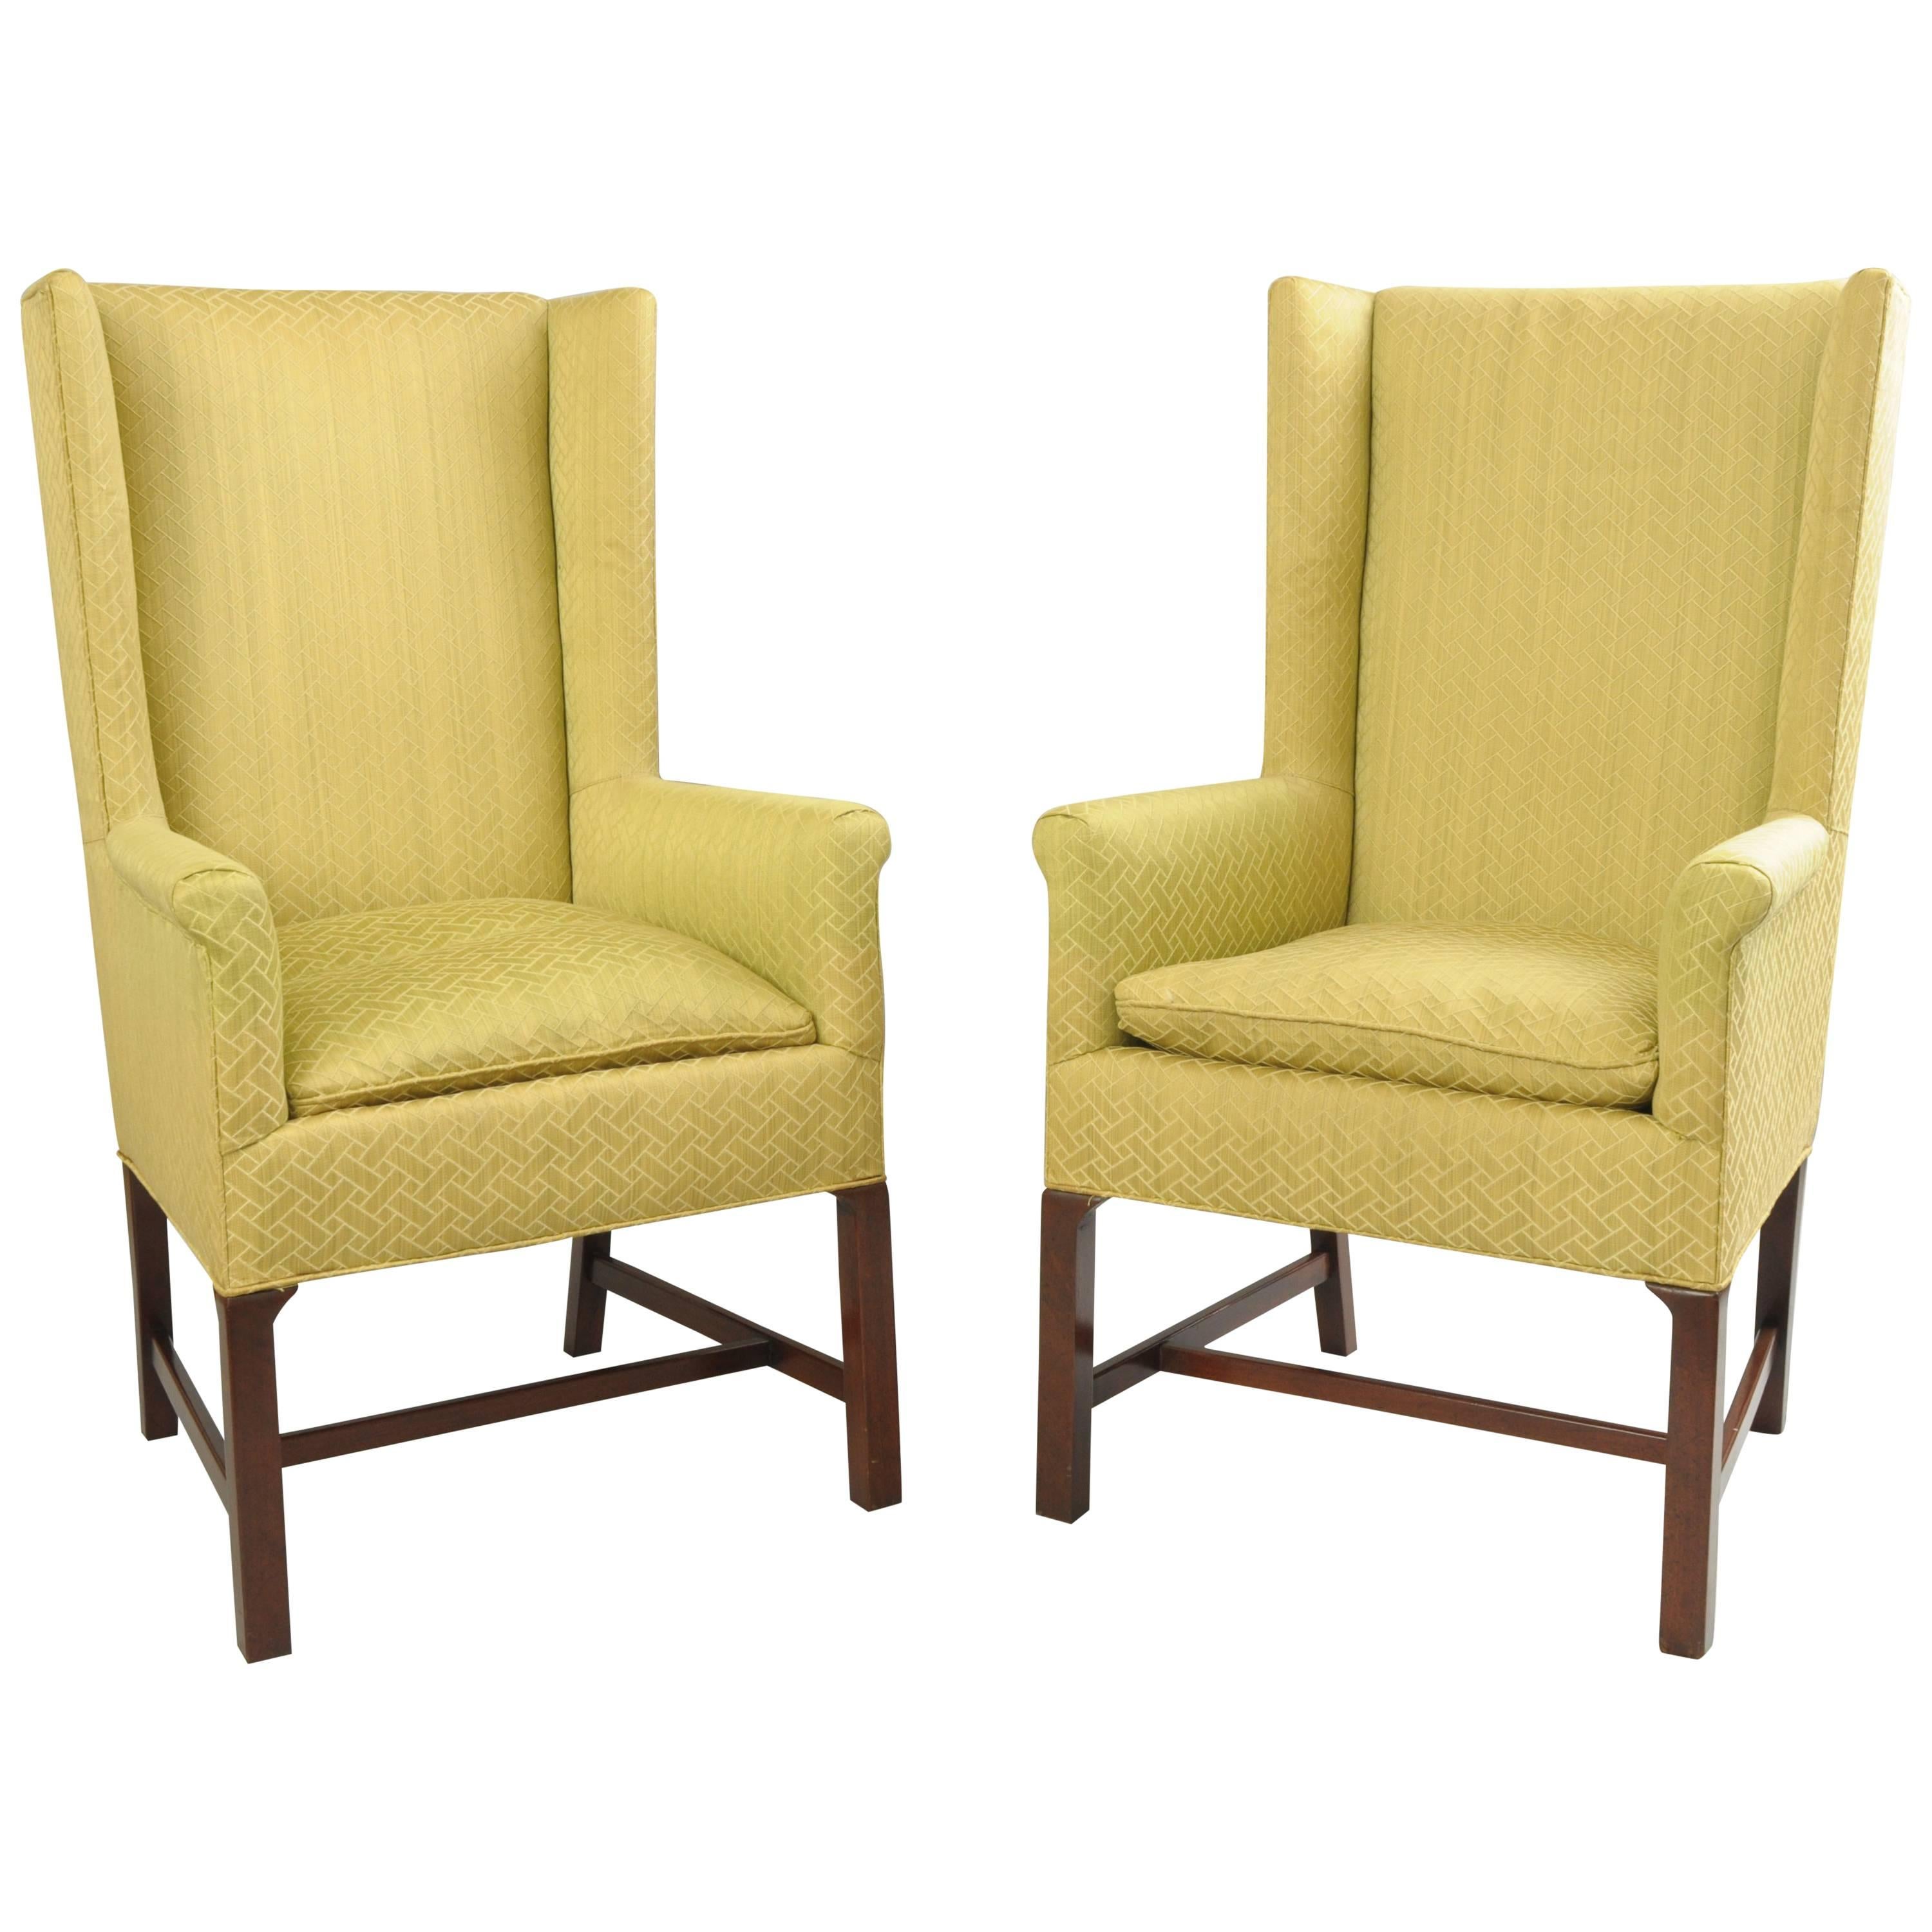 Pair of Mid-Century Modern Mahogany Wingback Lounge Chairs after Edward Wormley